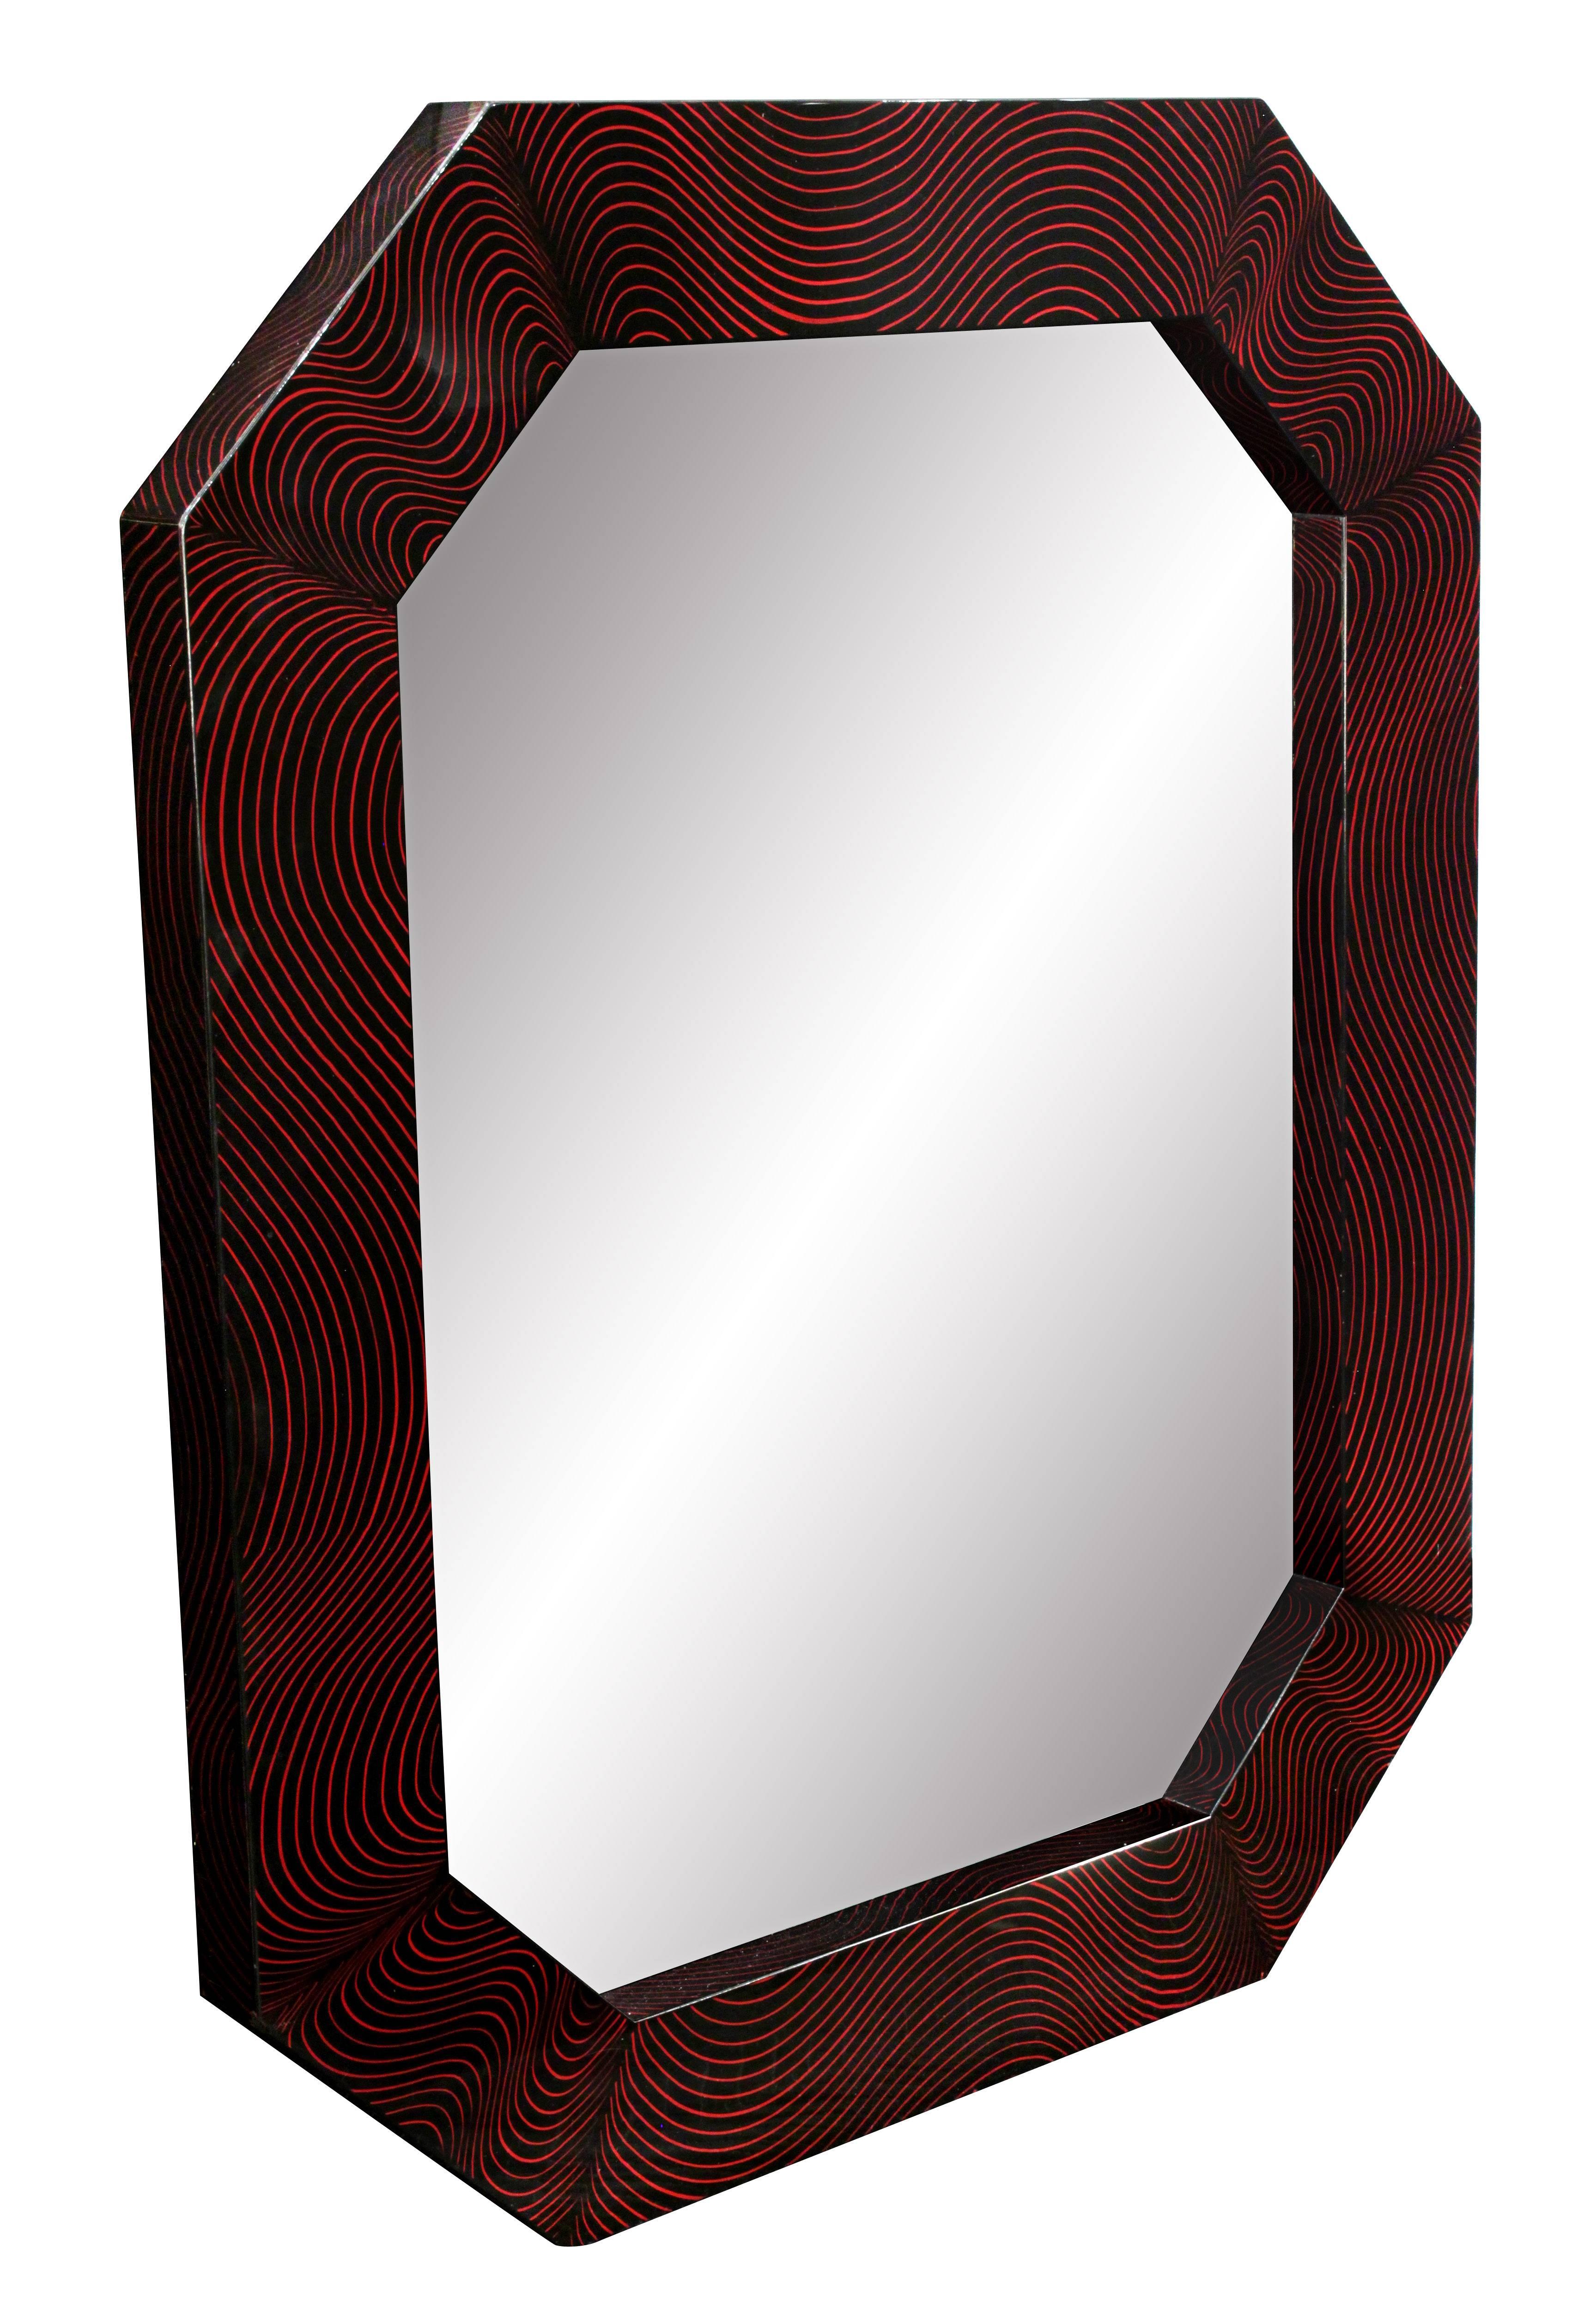 Studio made lacquered mirror with graphic design by F. Digennaro, series of 12, American, 1981. Signed on back 